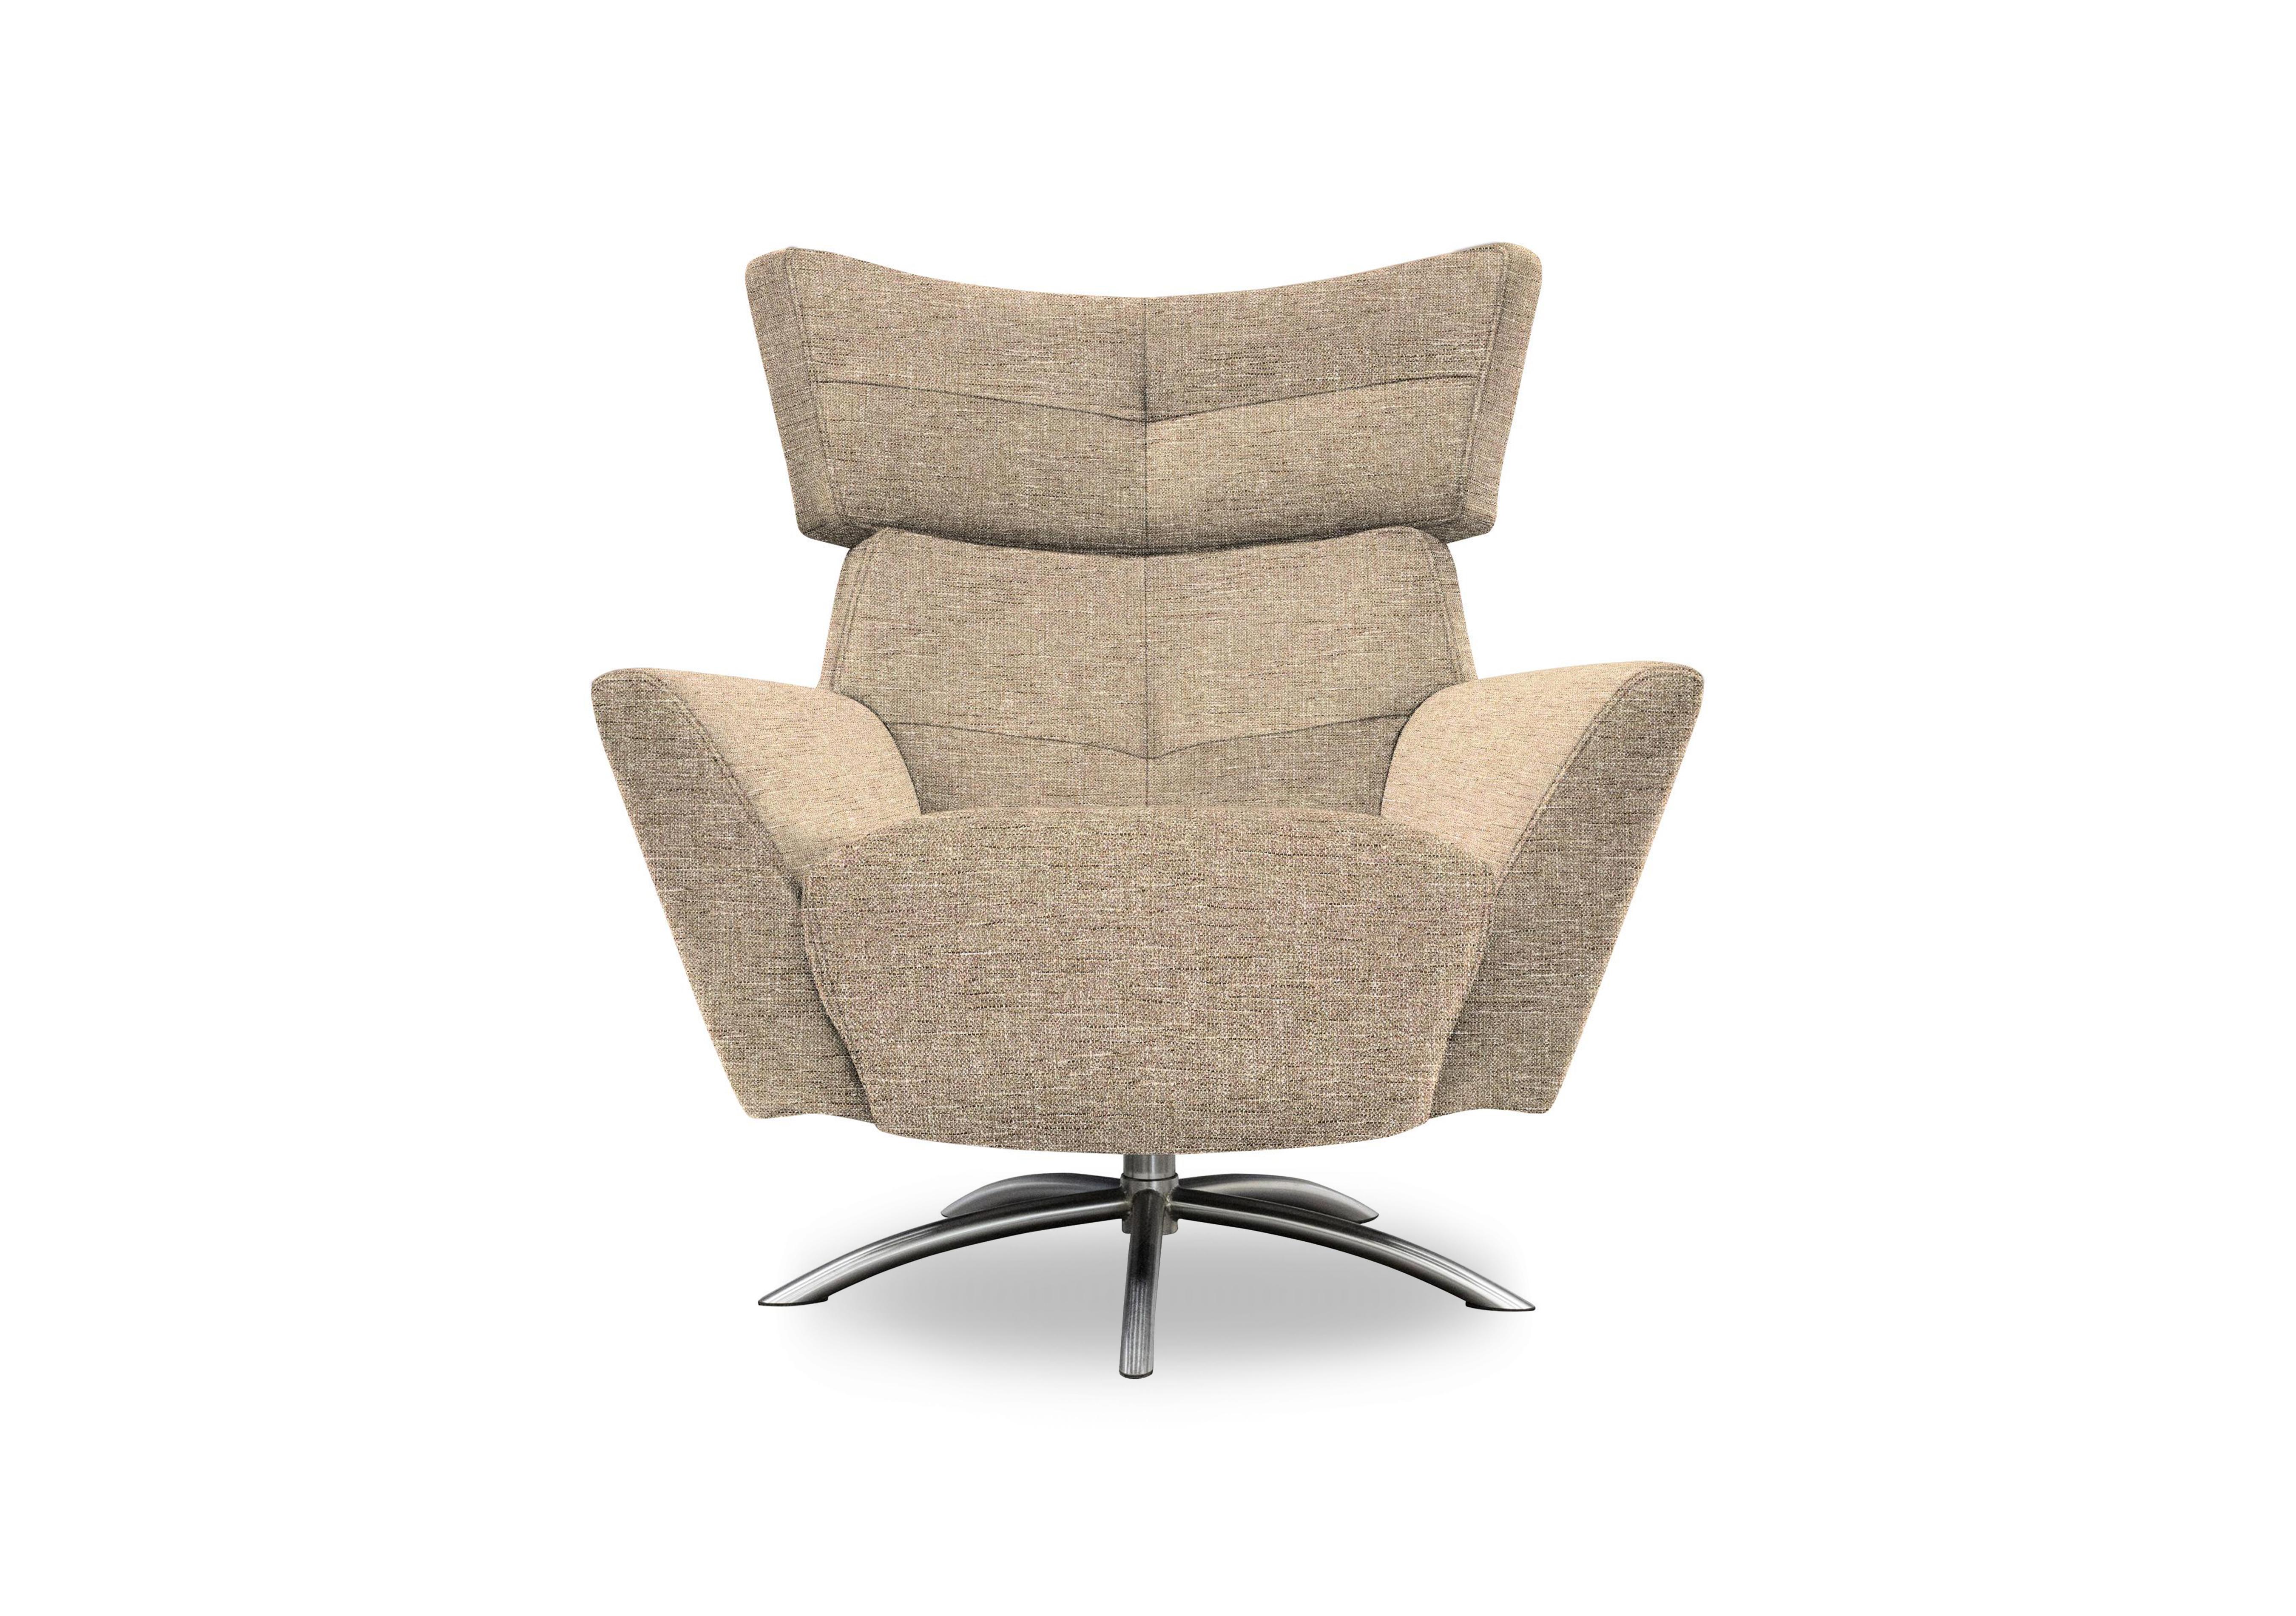 Arlo Fabric Swivel Chair in A022 Dapple Sparrow Ch Ft on Furniture Village